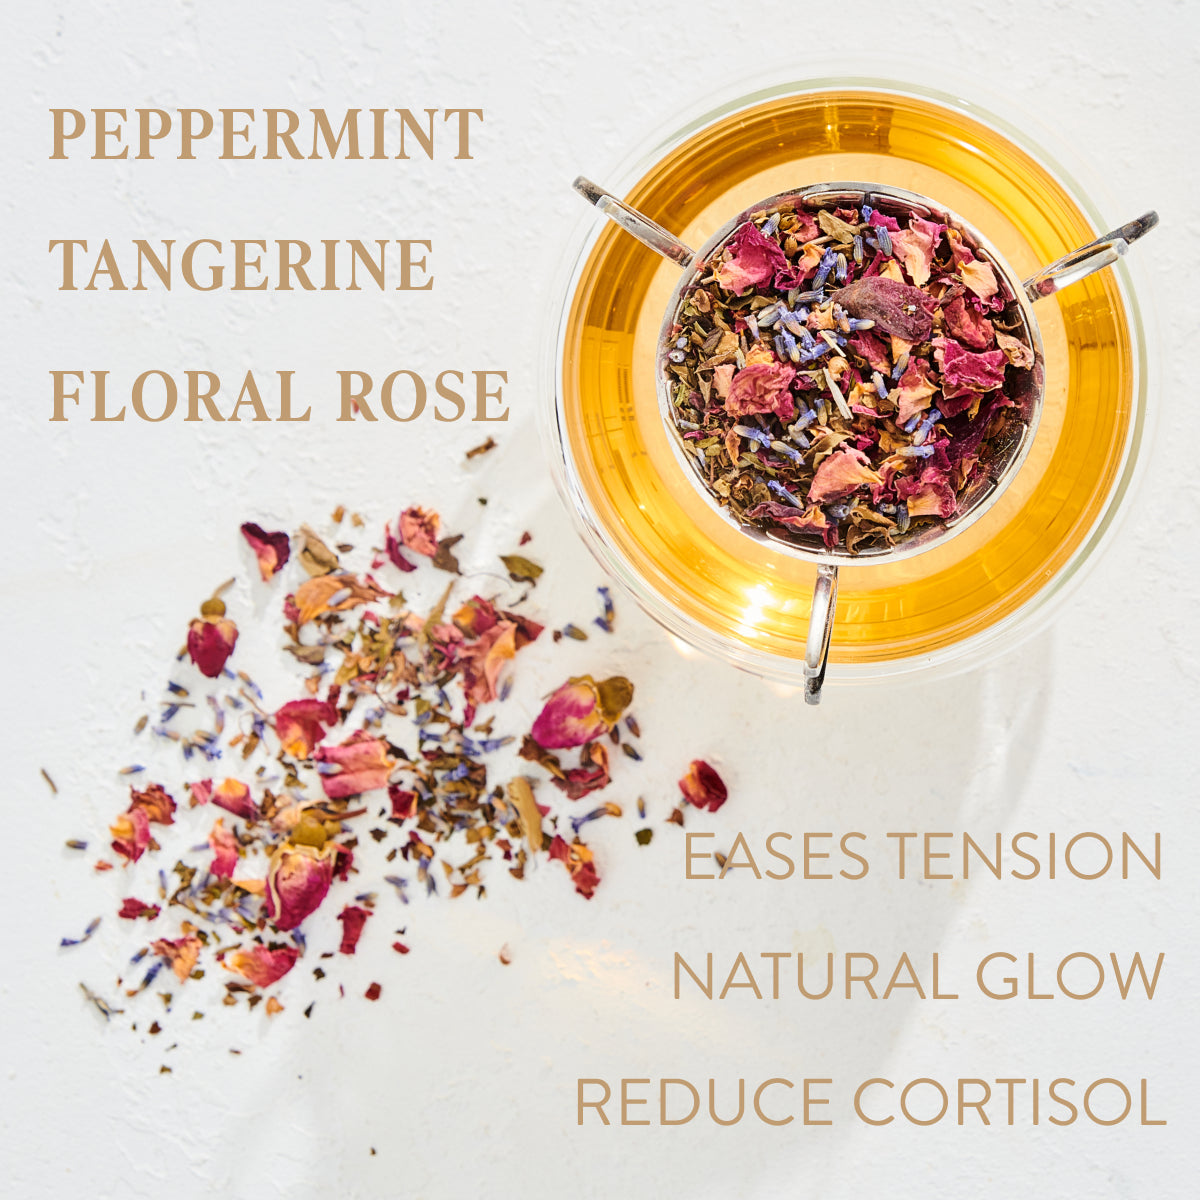 A glass teapot filled with Child&#39;s Pose™ Herbal Adaptogen Tea for Sleep &amp; Restful Calm by Magic Hour sits on a white surface next to a scattered blend of dried loose leaf tea ingredients, including rose petals and other colorful flowers. Text around the image highlights the flavors: Peppermint, Tangerine, Floral Rose, and benefits: Eases Tension, Natural Glow, Reduce Cortisol.